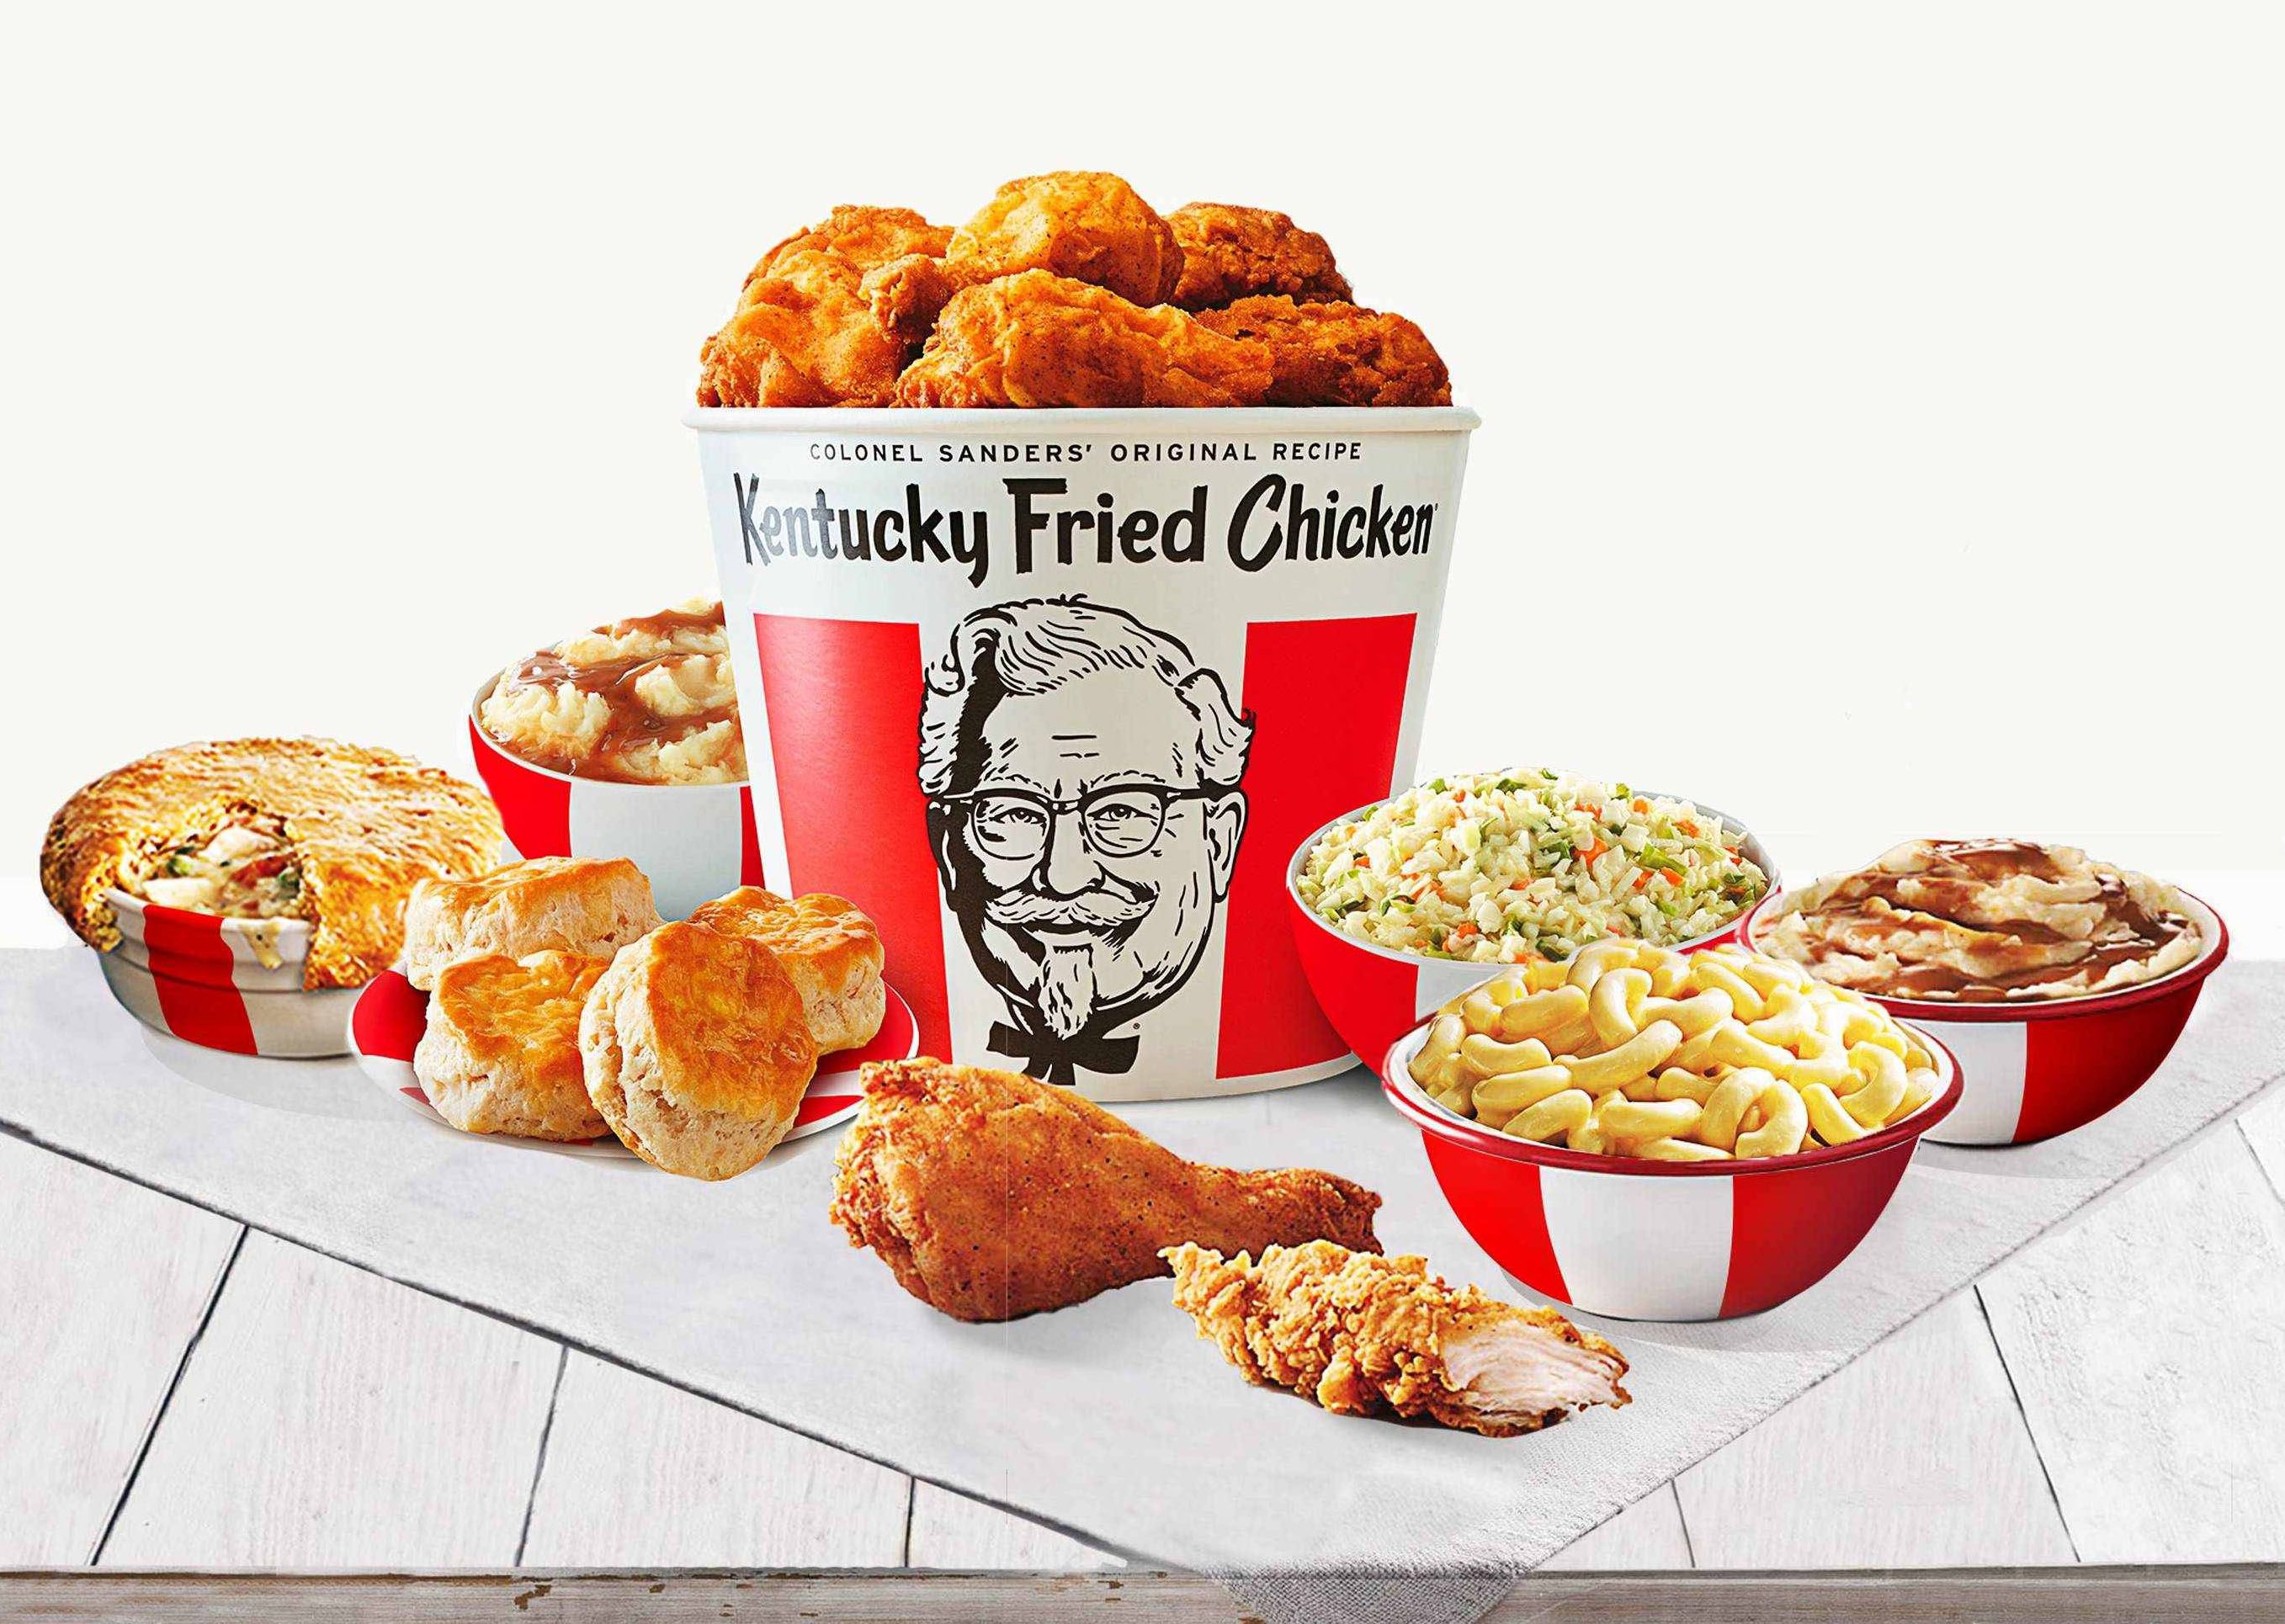 September 12 Only: Save $5 When You Order Over $20 of Kentucky Fried Chicken Through DoorDash.